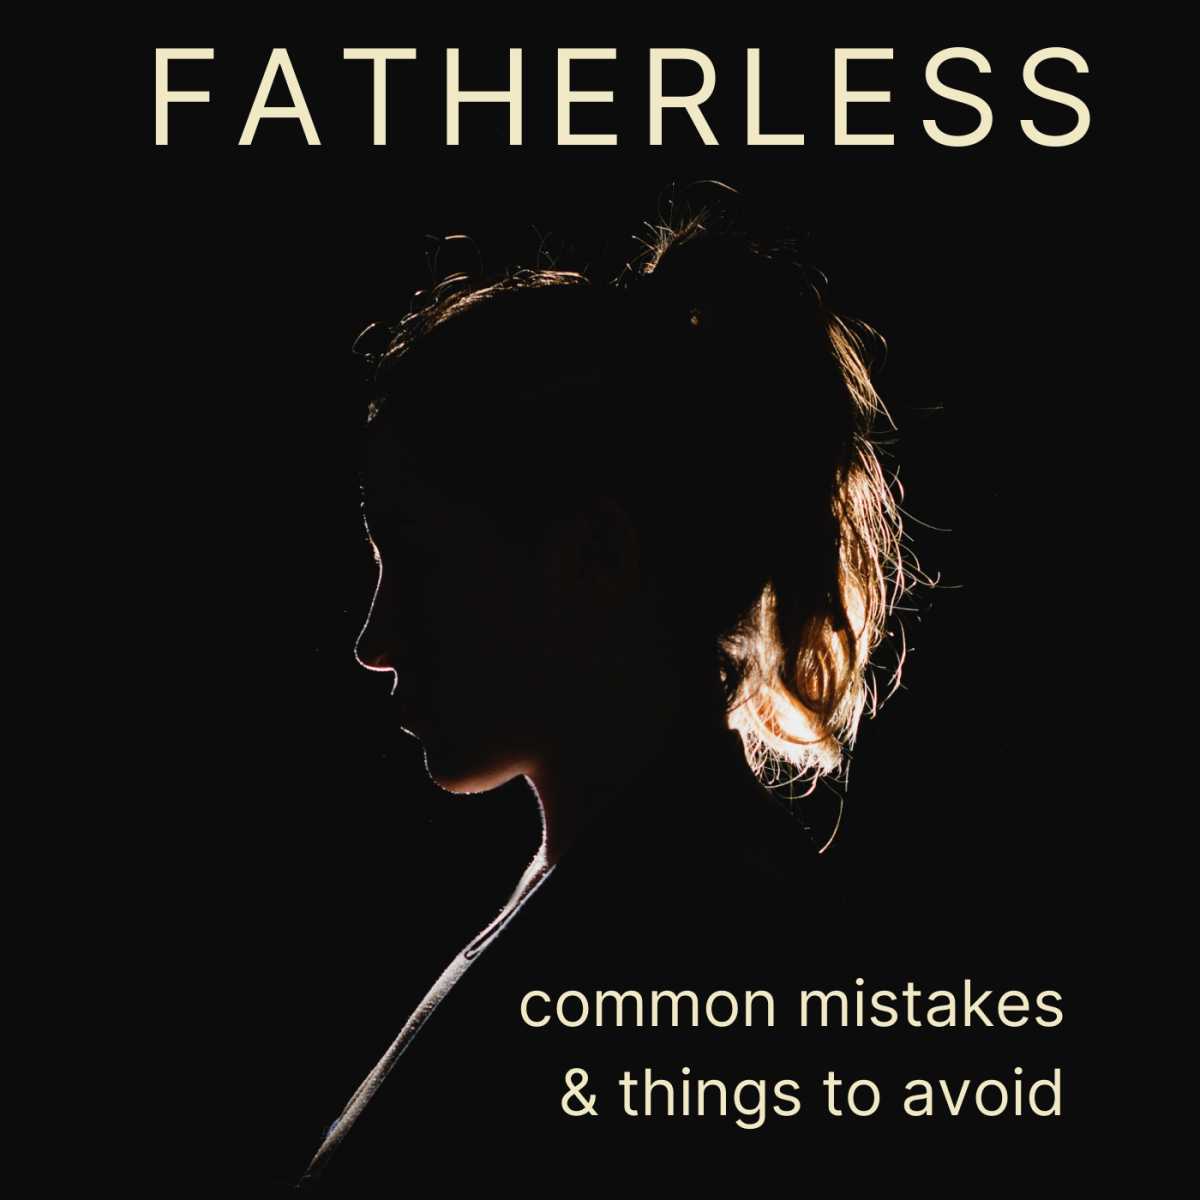 How to Avoid Common Mistakes That Fatherless Daughters Make